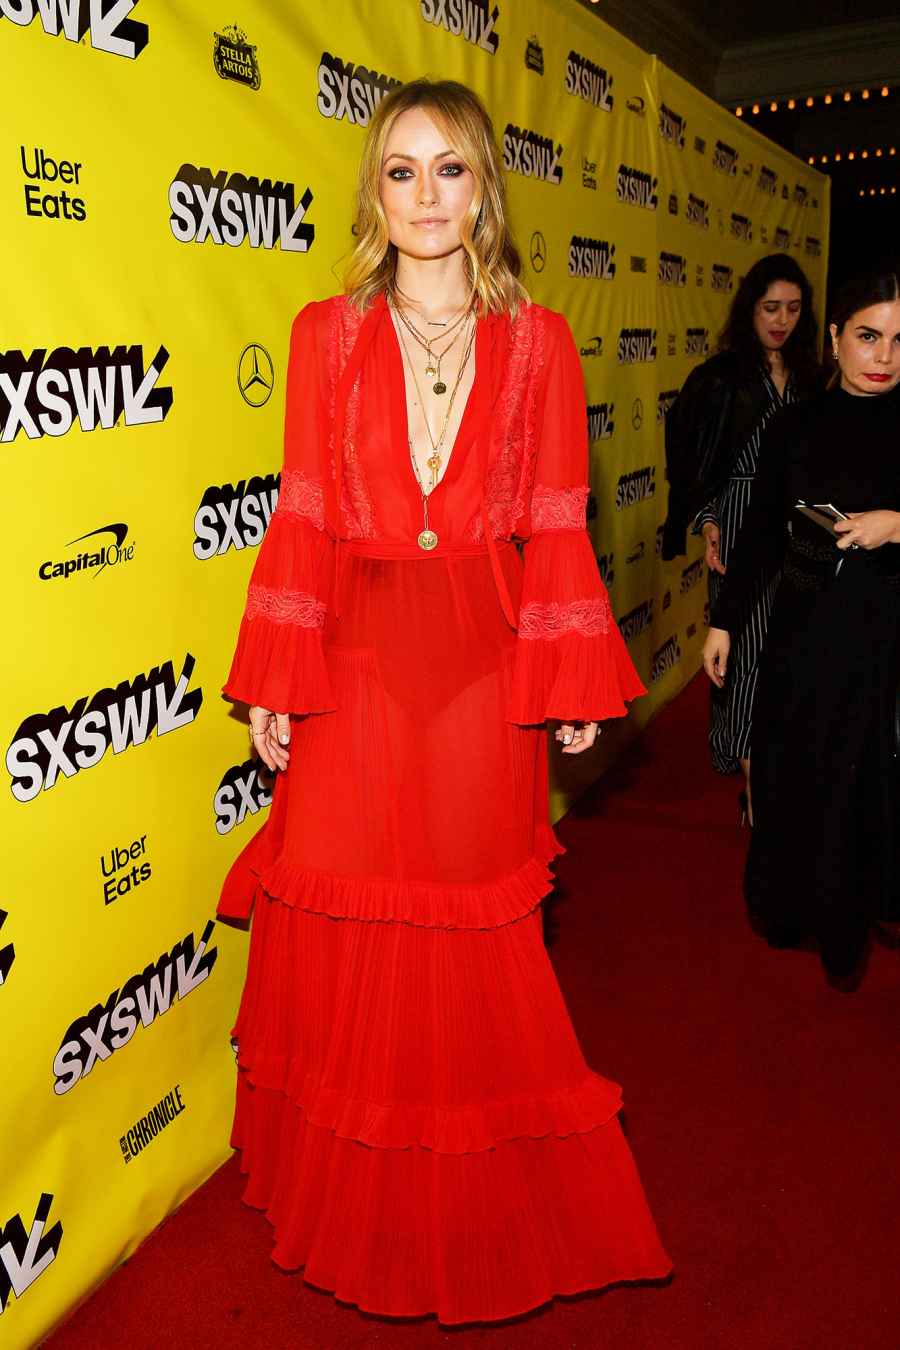 The Stars Bring Their Beauty and Style A-Game to SXSW